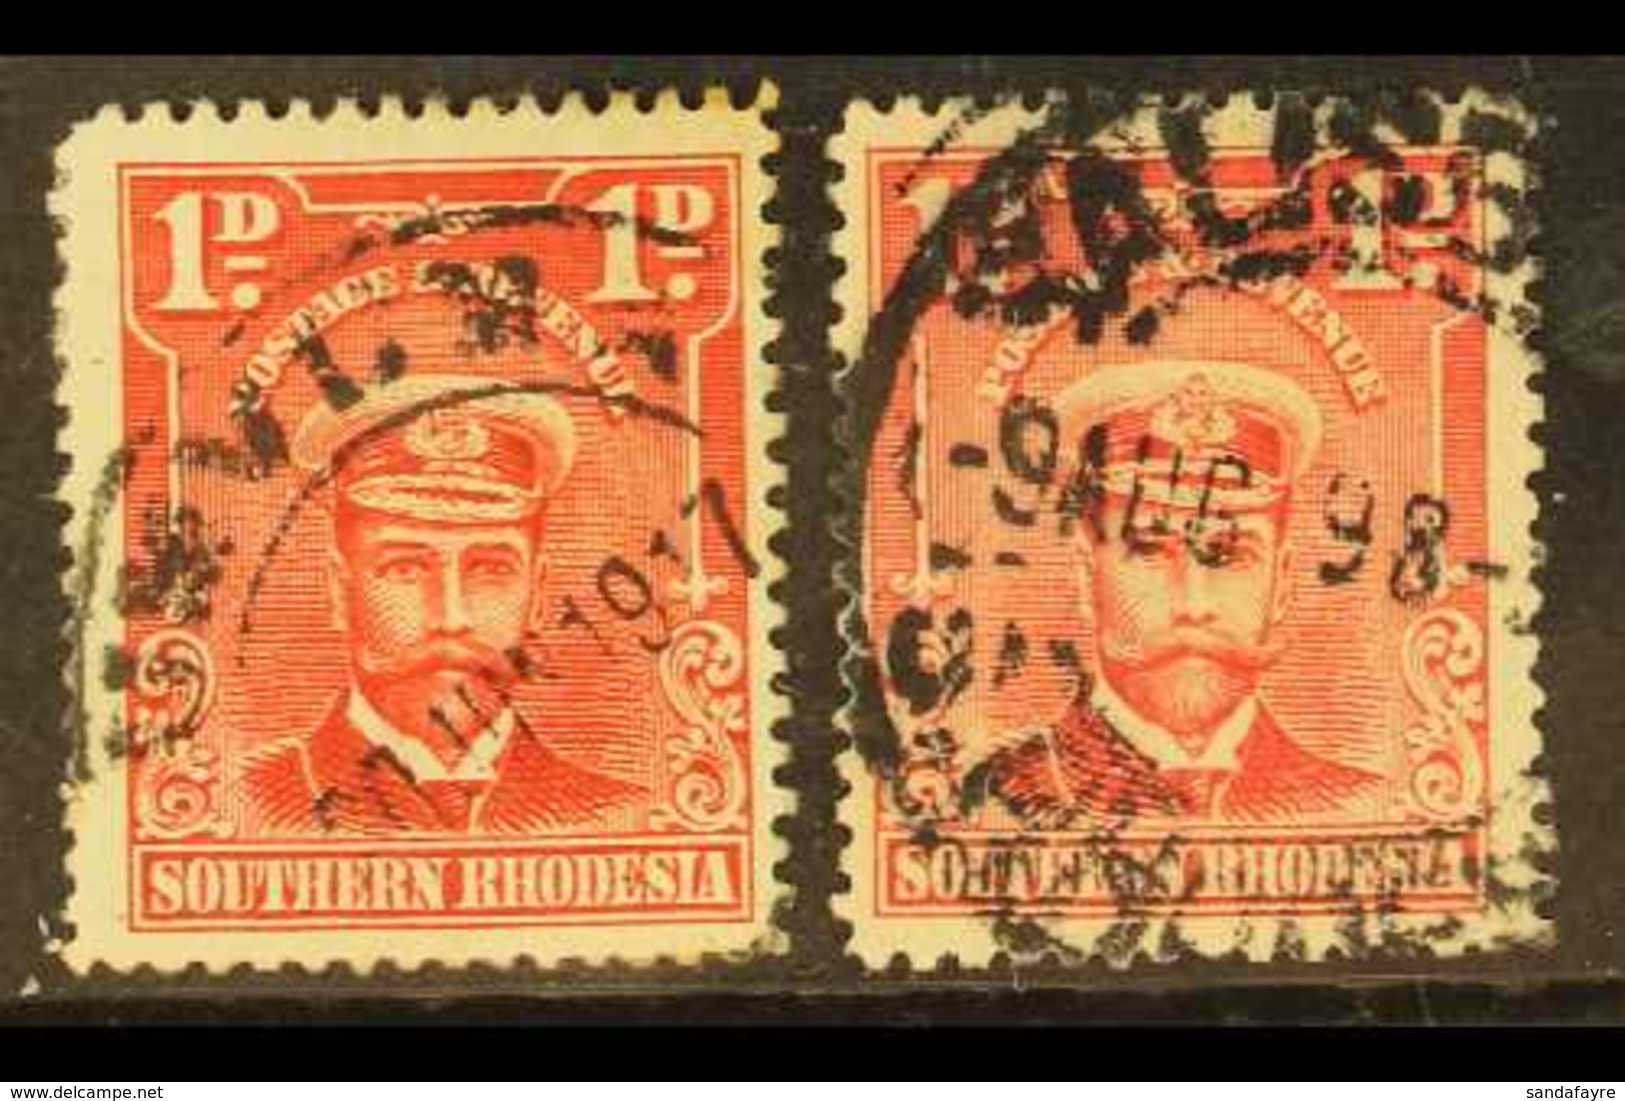 1924 CANCELLATION ERRORS Two 1d Bright Rose Stamps, SG 2, One With "1917" Year Date, The Other With "-9 AUG 98" Date (2) - Zuid-Rhodesië (...-1964)